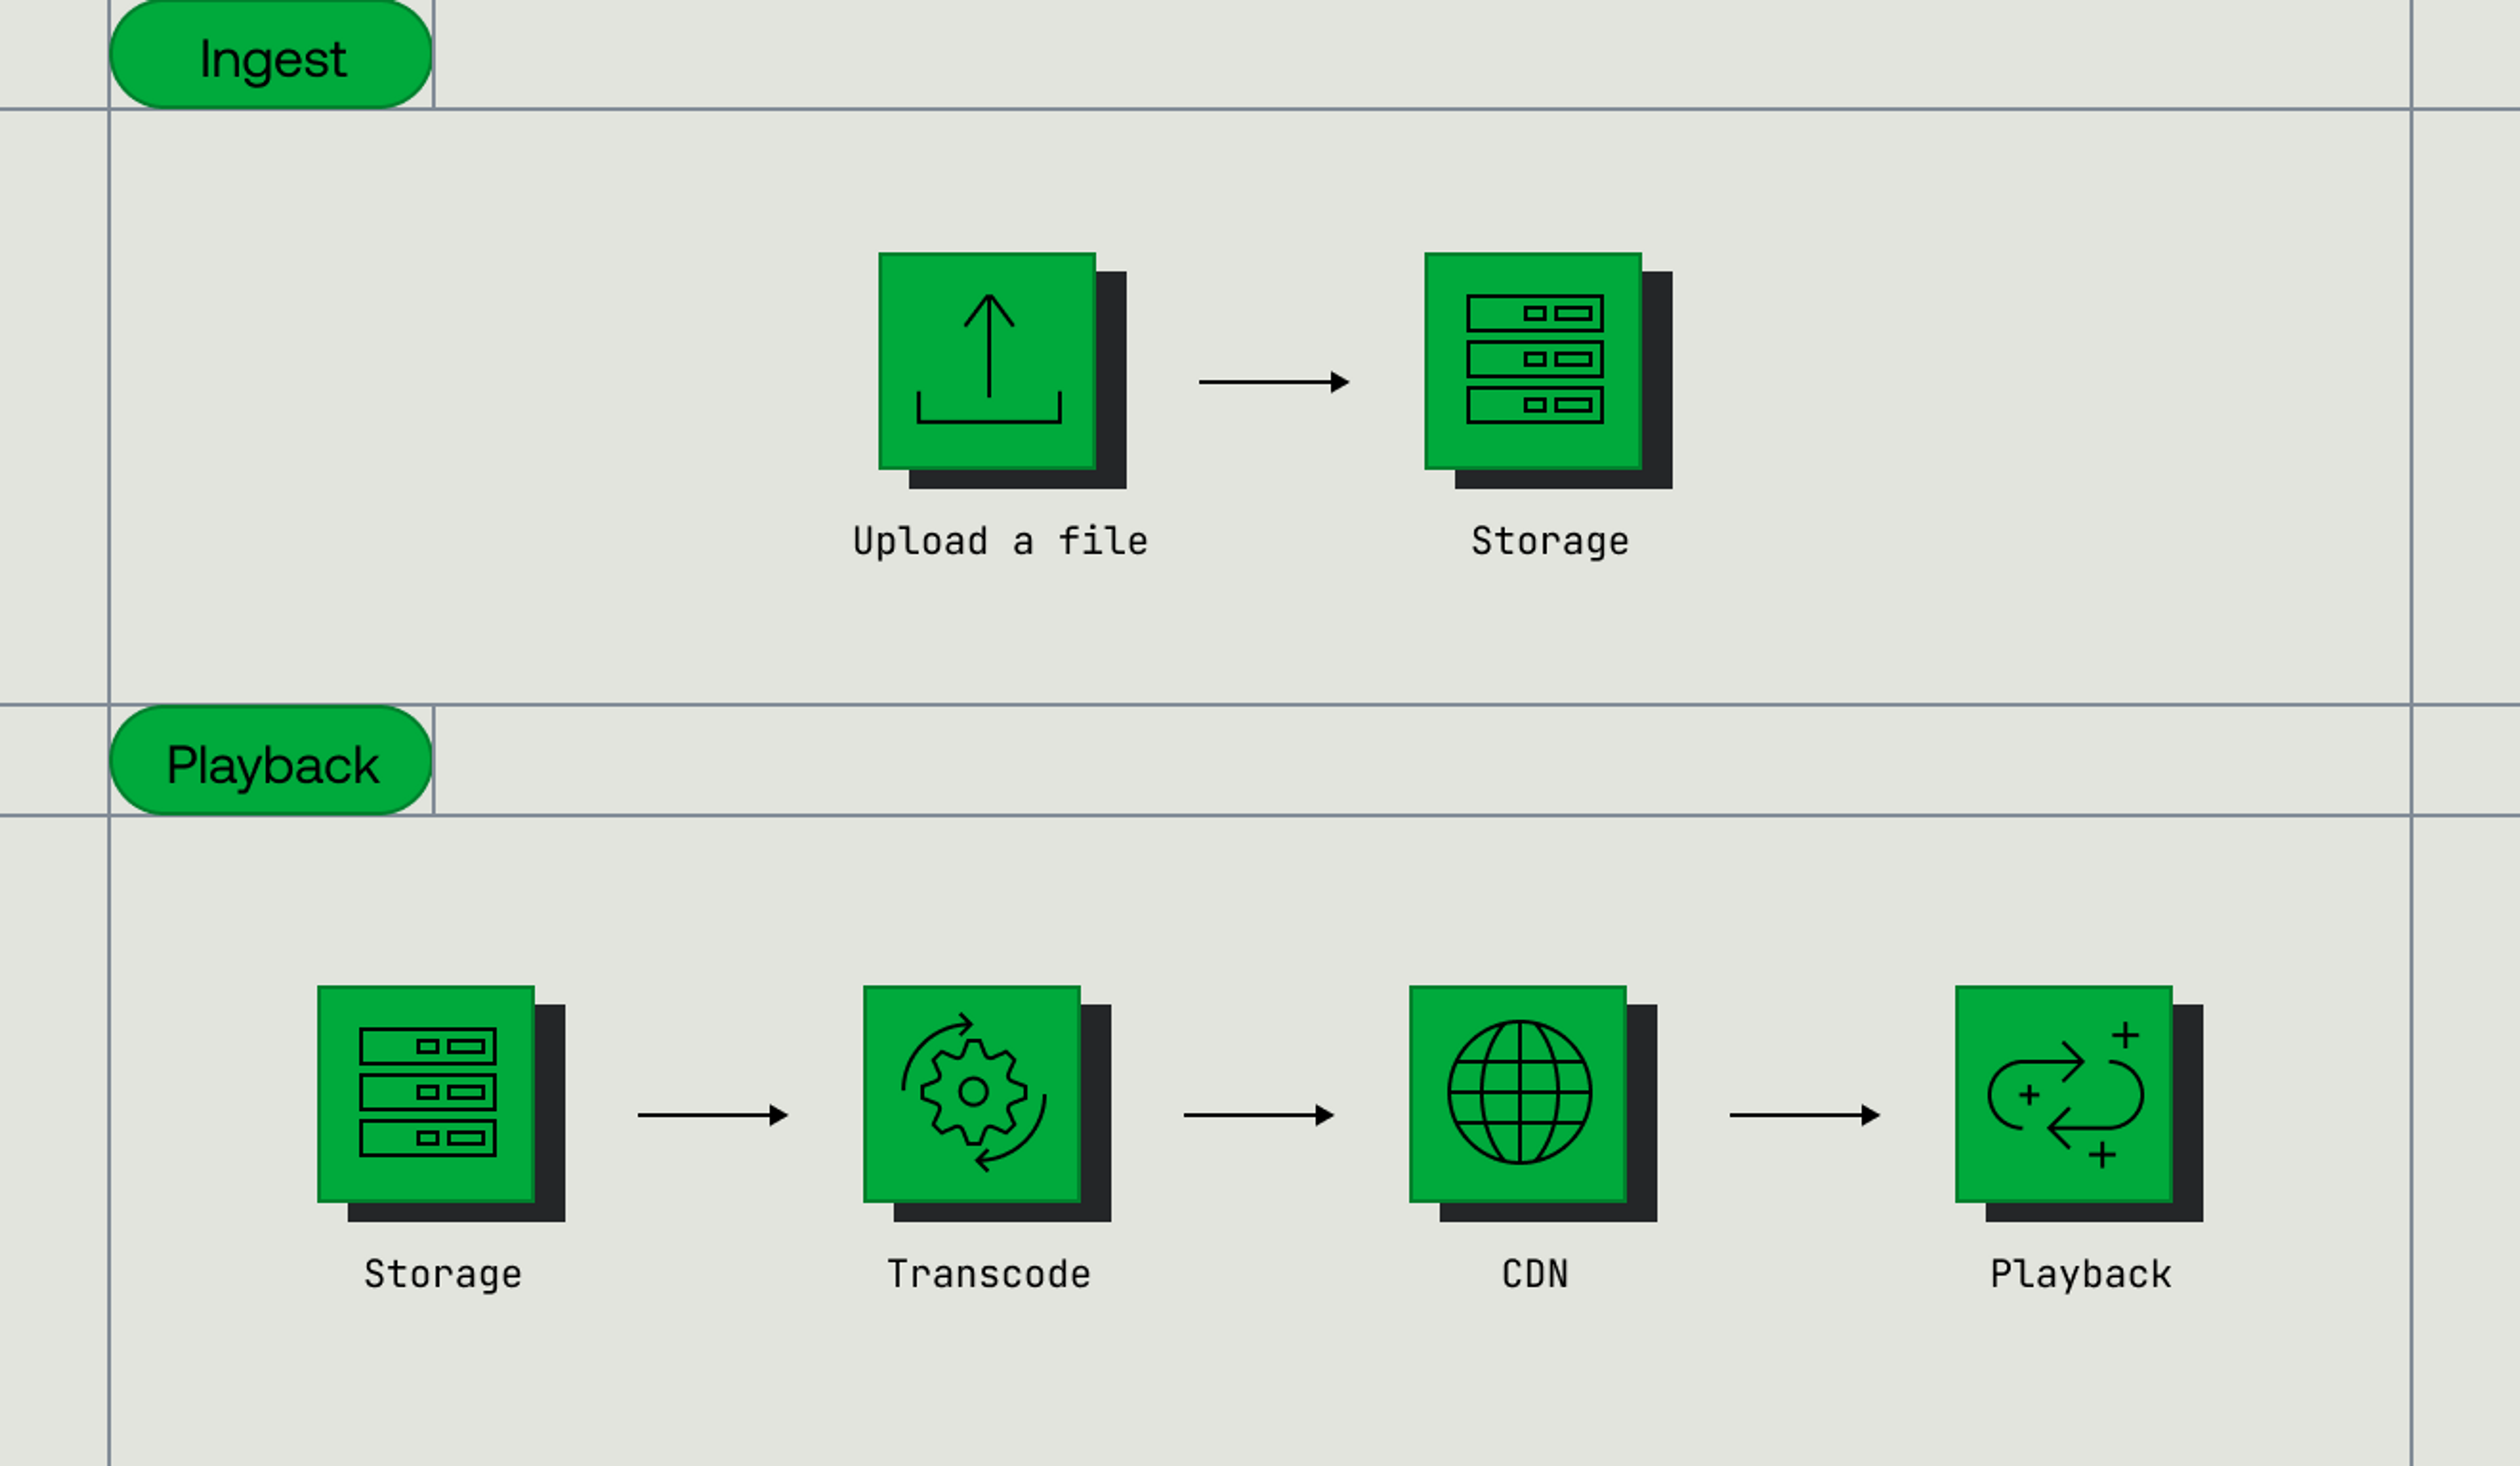 Ingest pipeline with Upload directly to storage, playback pipeline with storage to transcode to CDN to playback